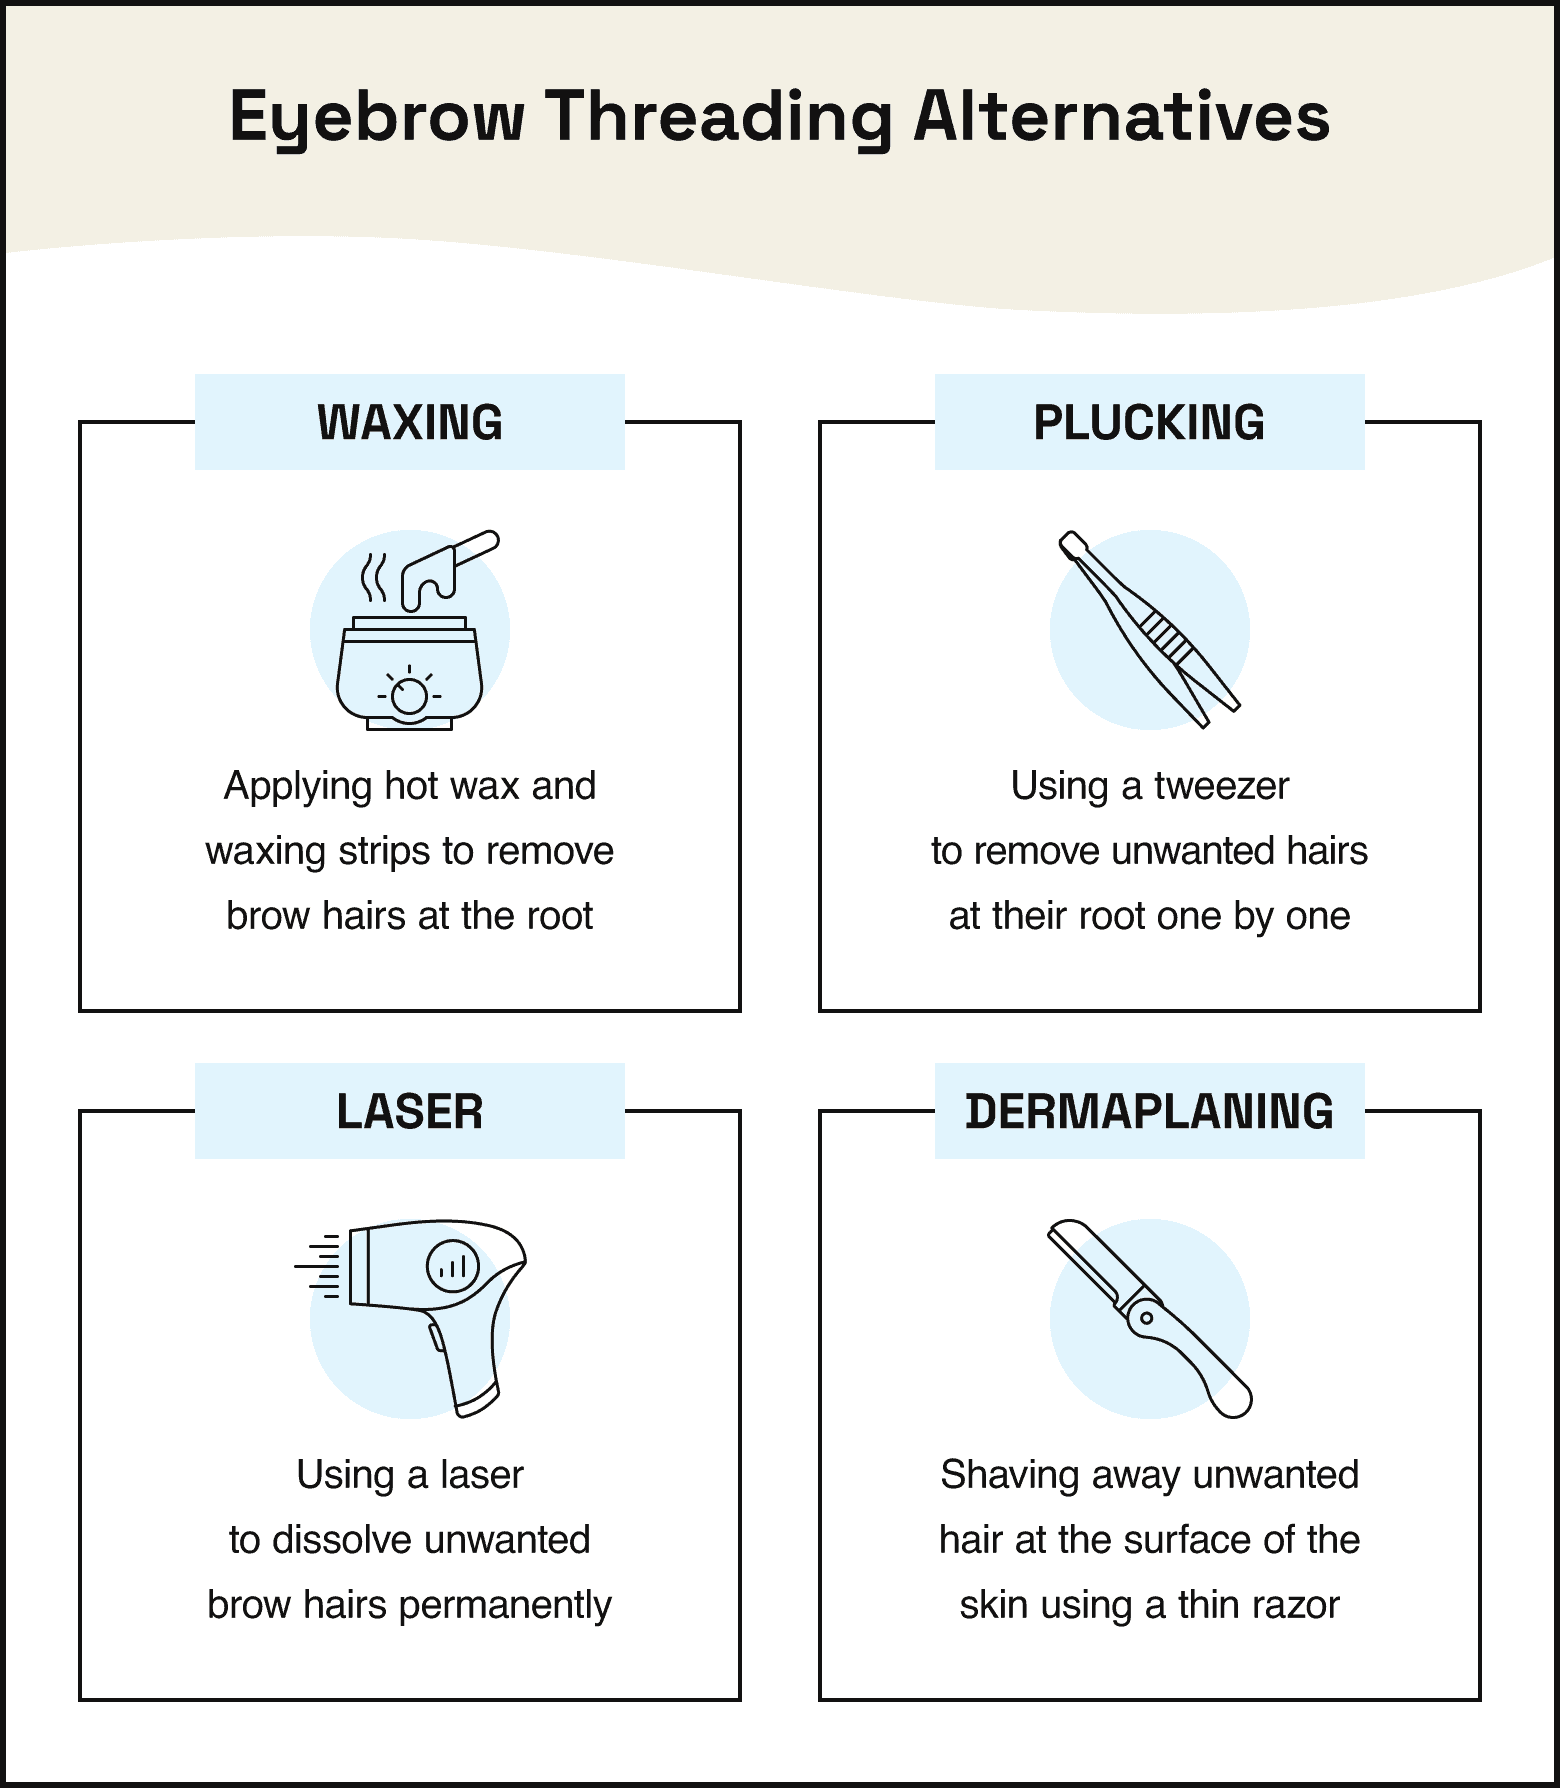 illustrations and text describing the following alternatives to brow threading: waxing, plucking, laser hair removal, and dermaplaning